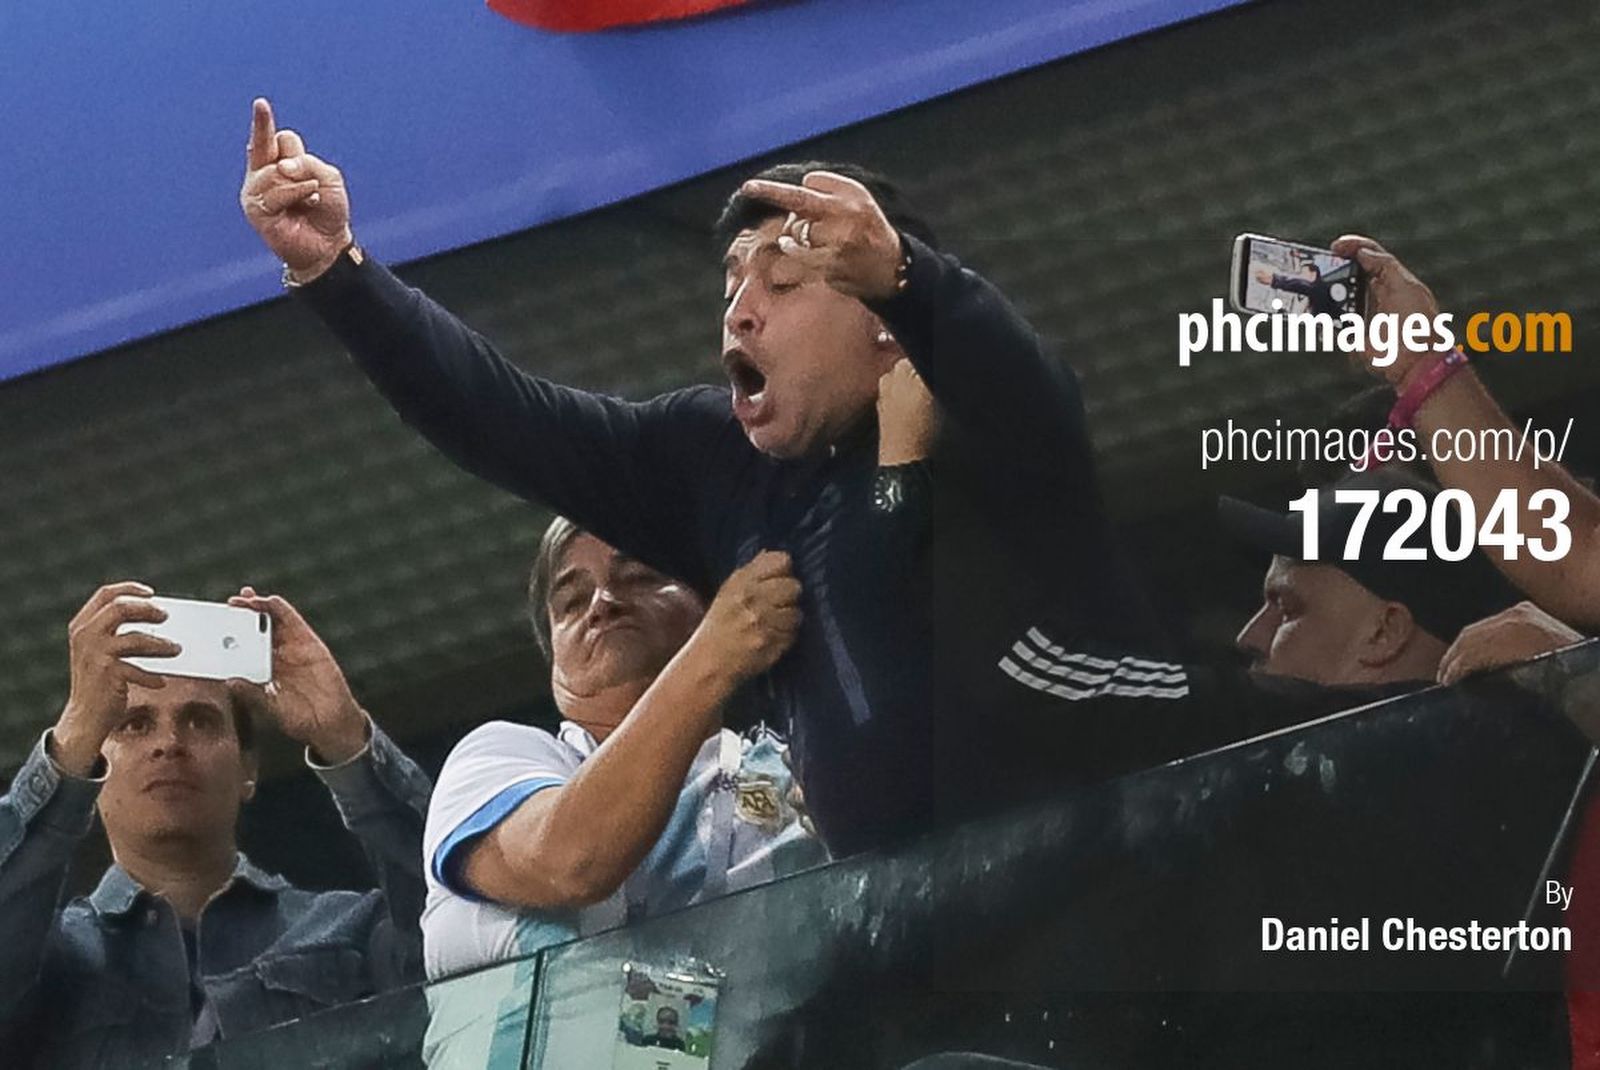 Diego Maradona celebrates the second goal in his usual classy manner